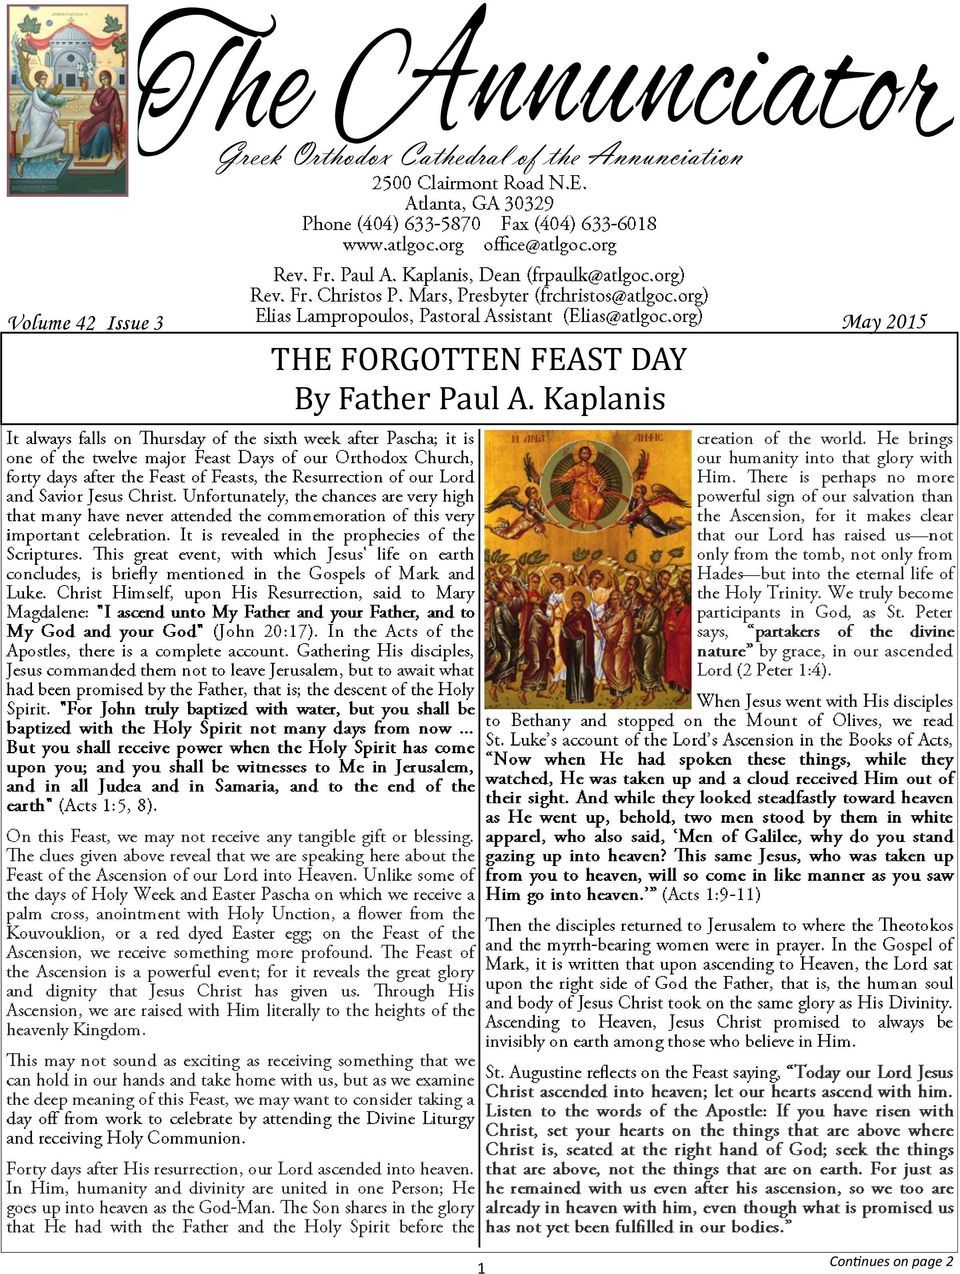 2015 THE FORGOTTEN FEAST DAY By Father